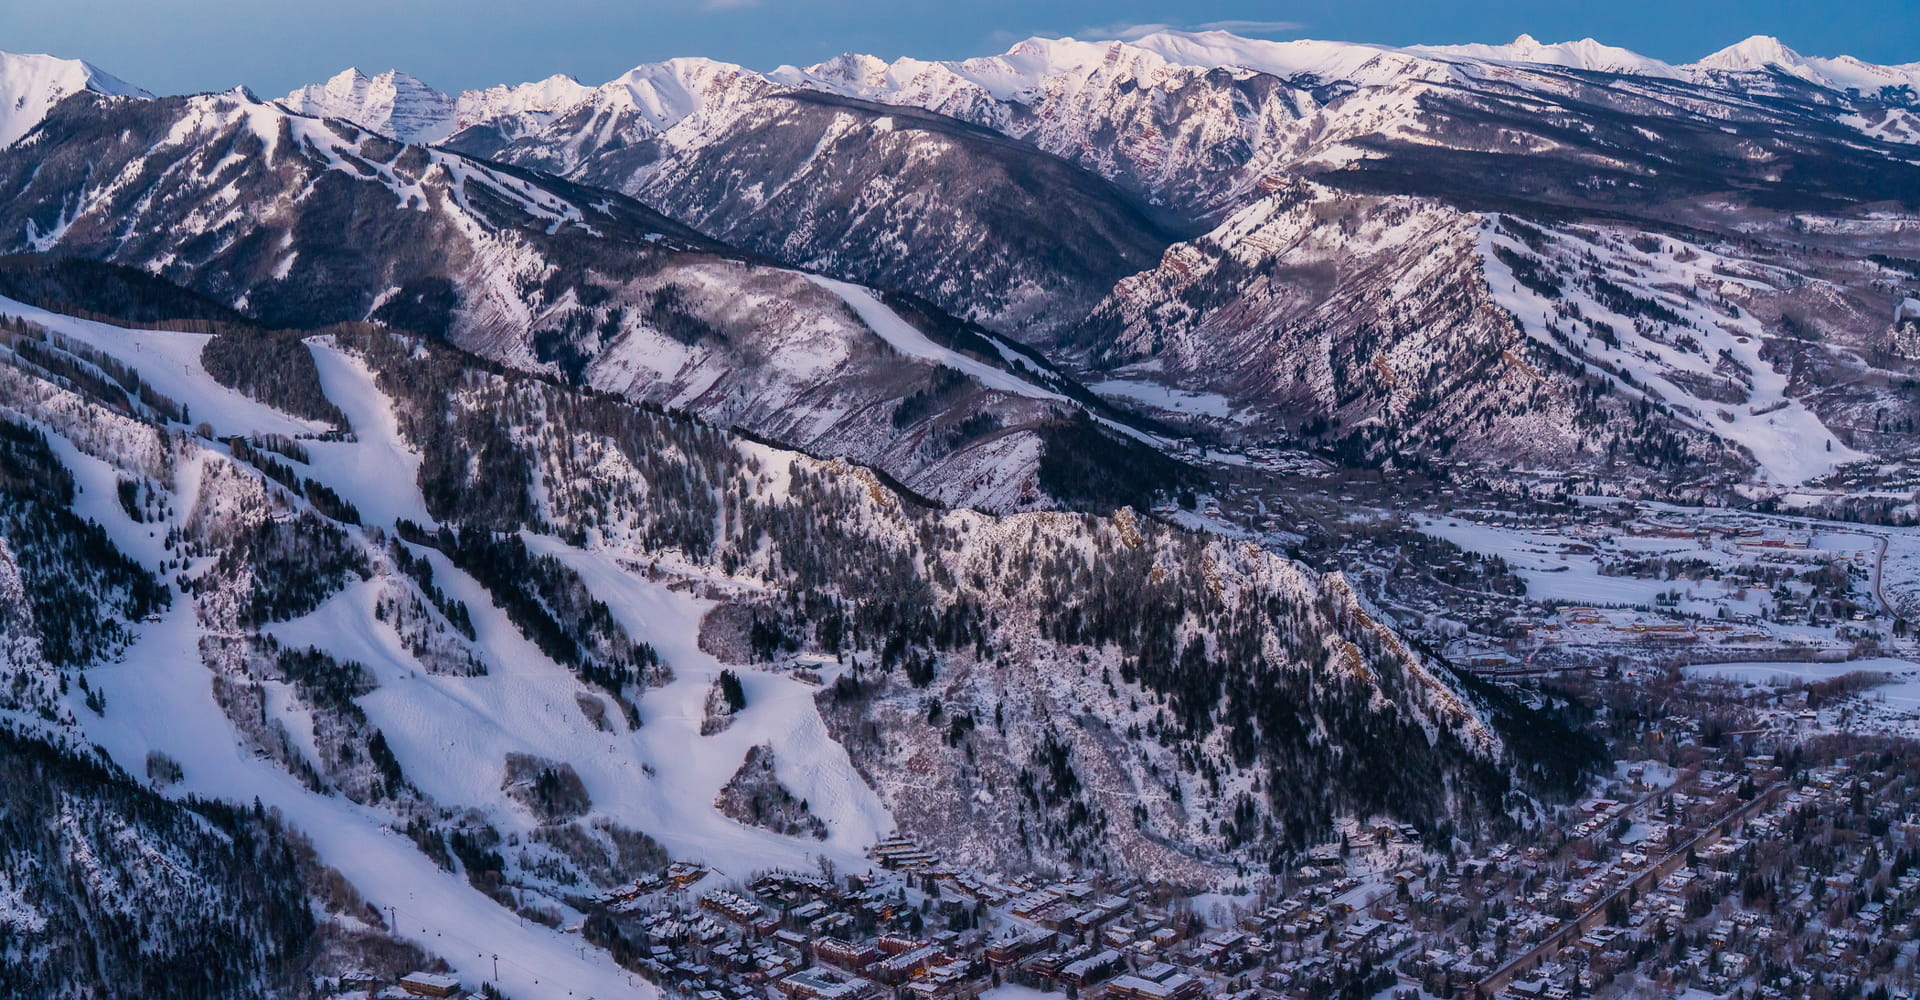 Dawn breaks over the four mountains of Aspen Snowmass